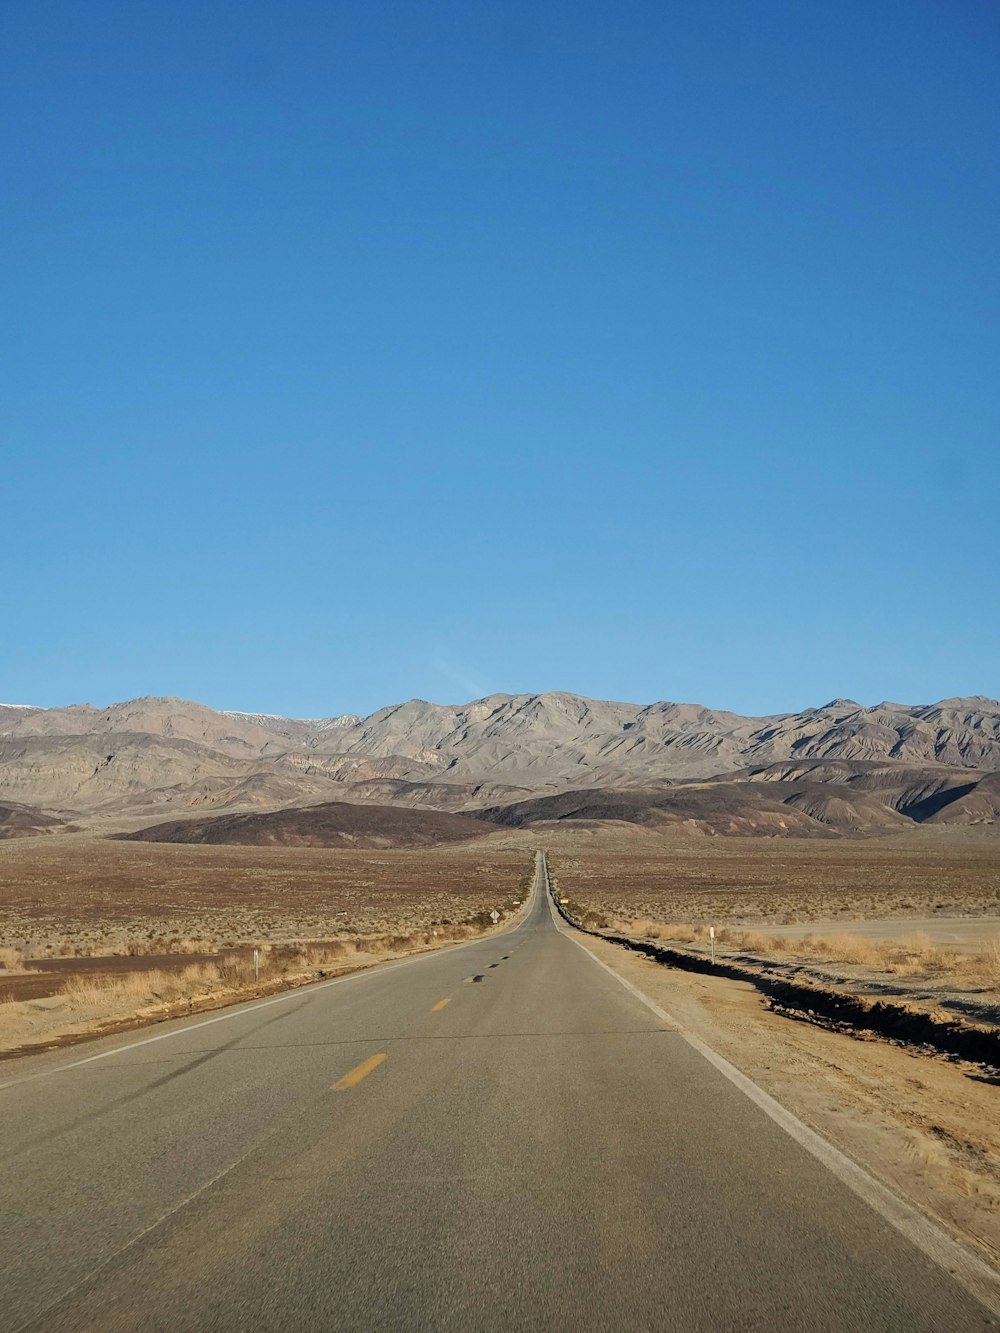 a long empty road with mountains in the background